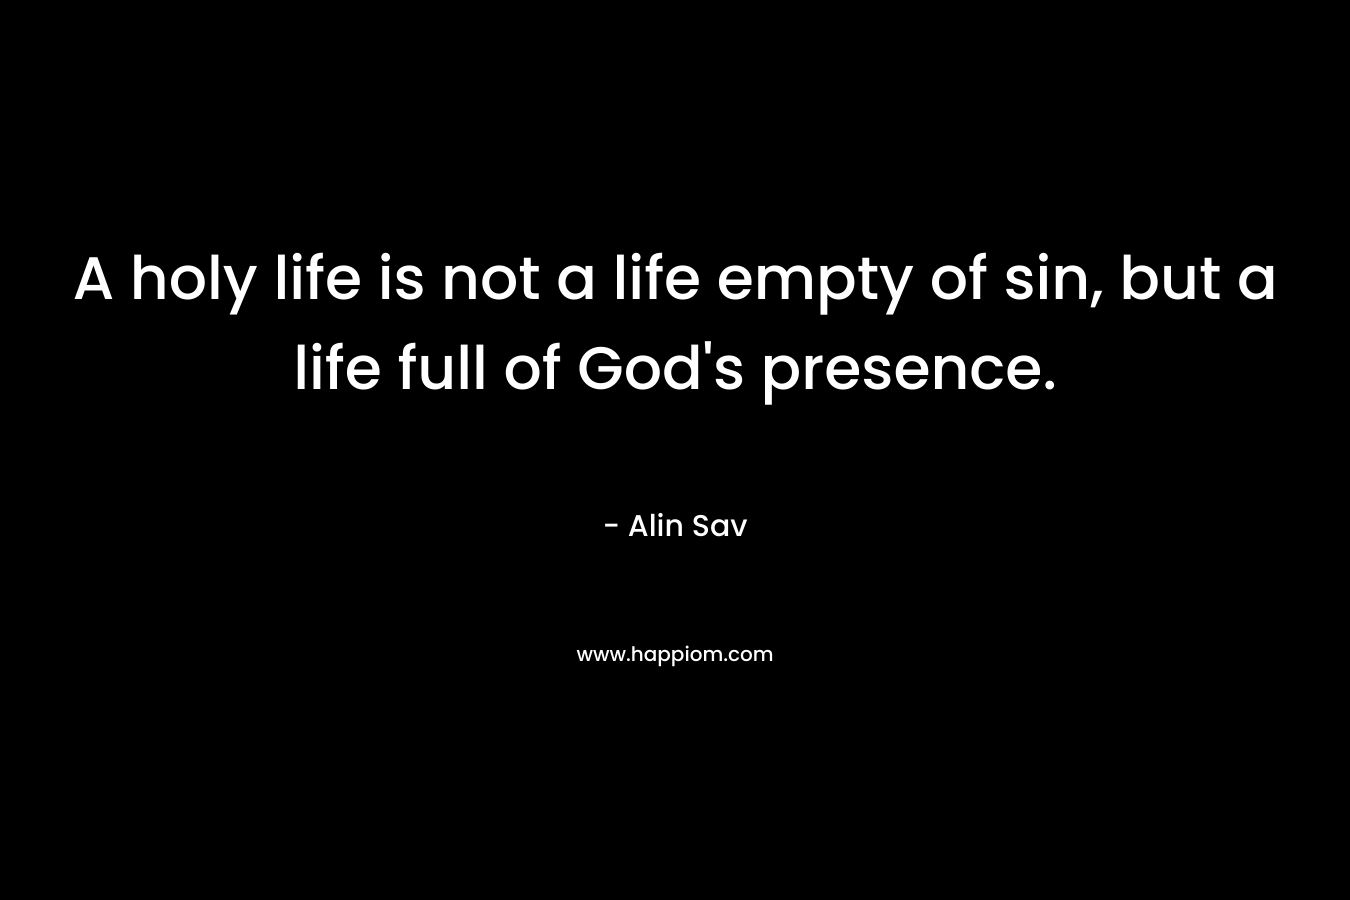 A holy life is not a life empty of sin, but a life full of God's presence.